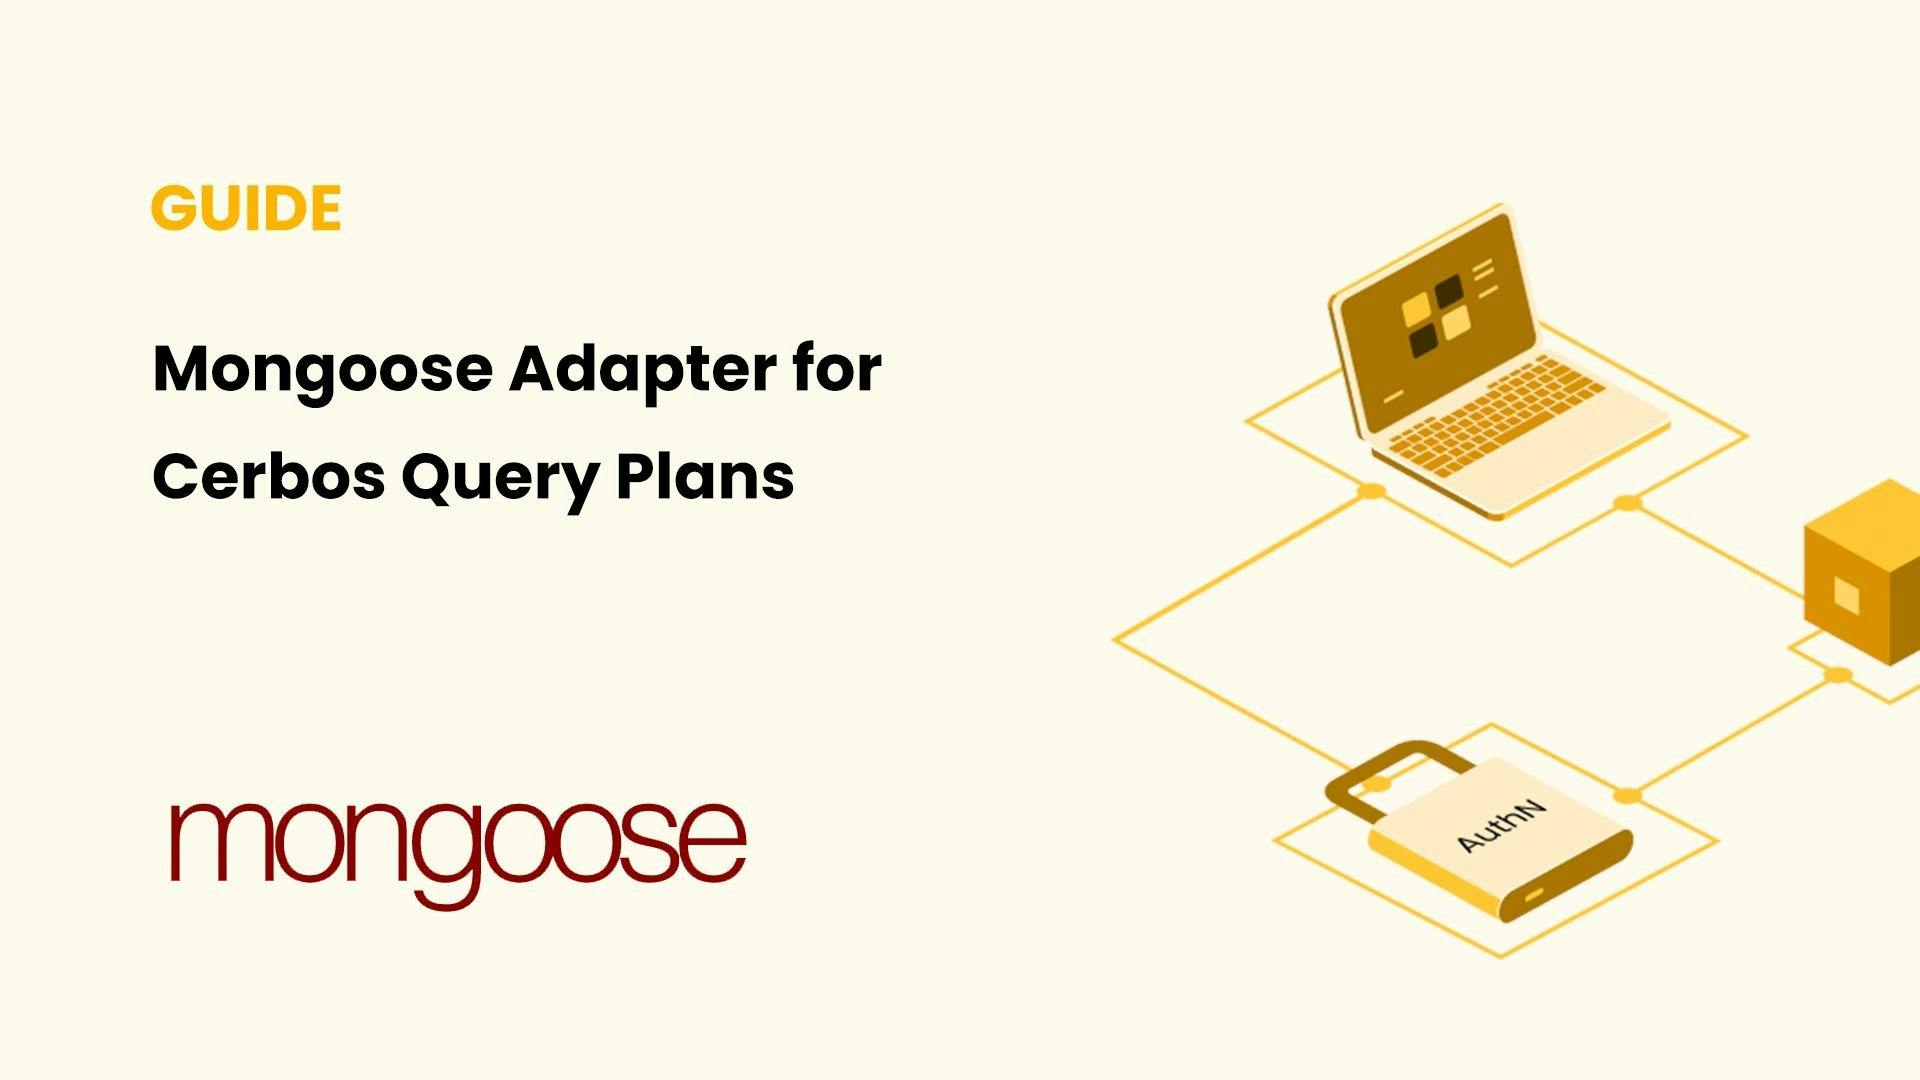 Mongoose adapter for Cerbos Query Plans